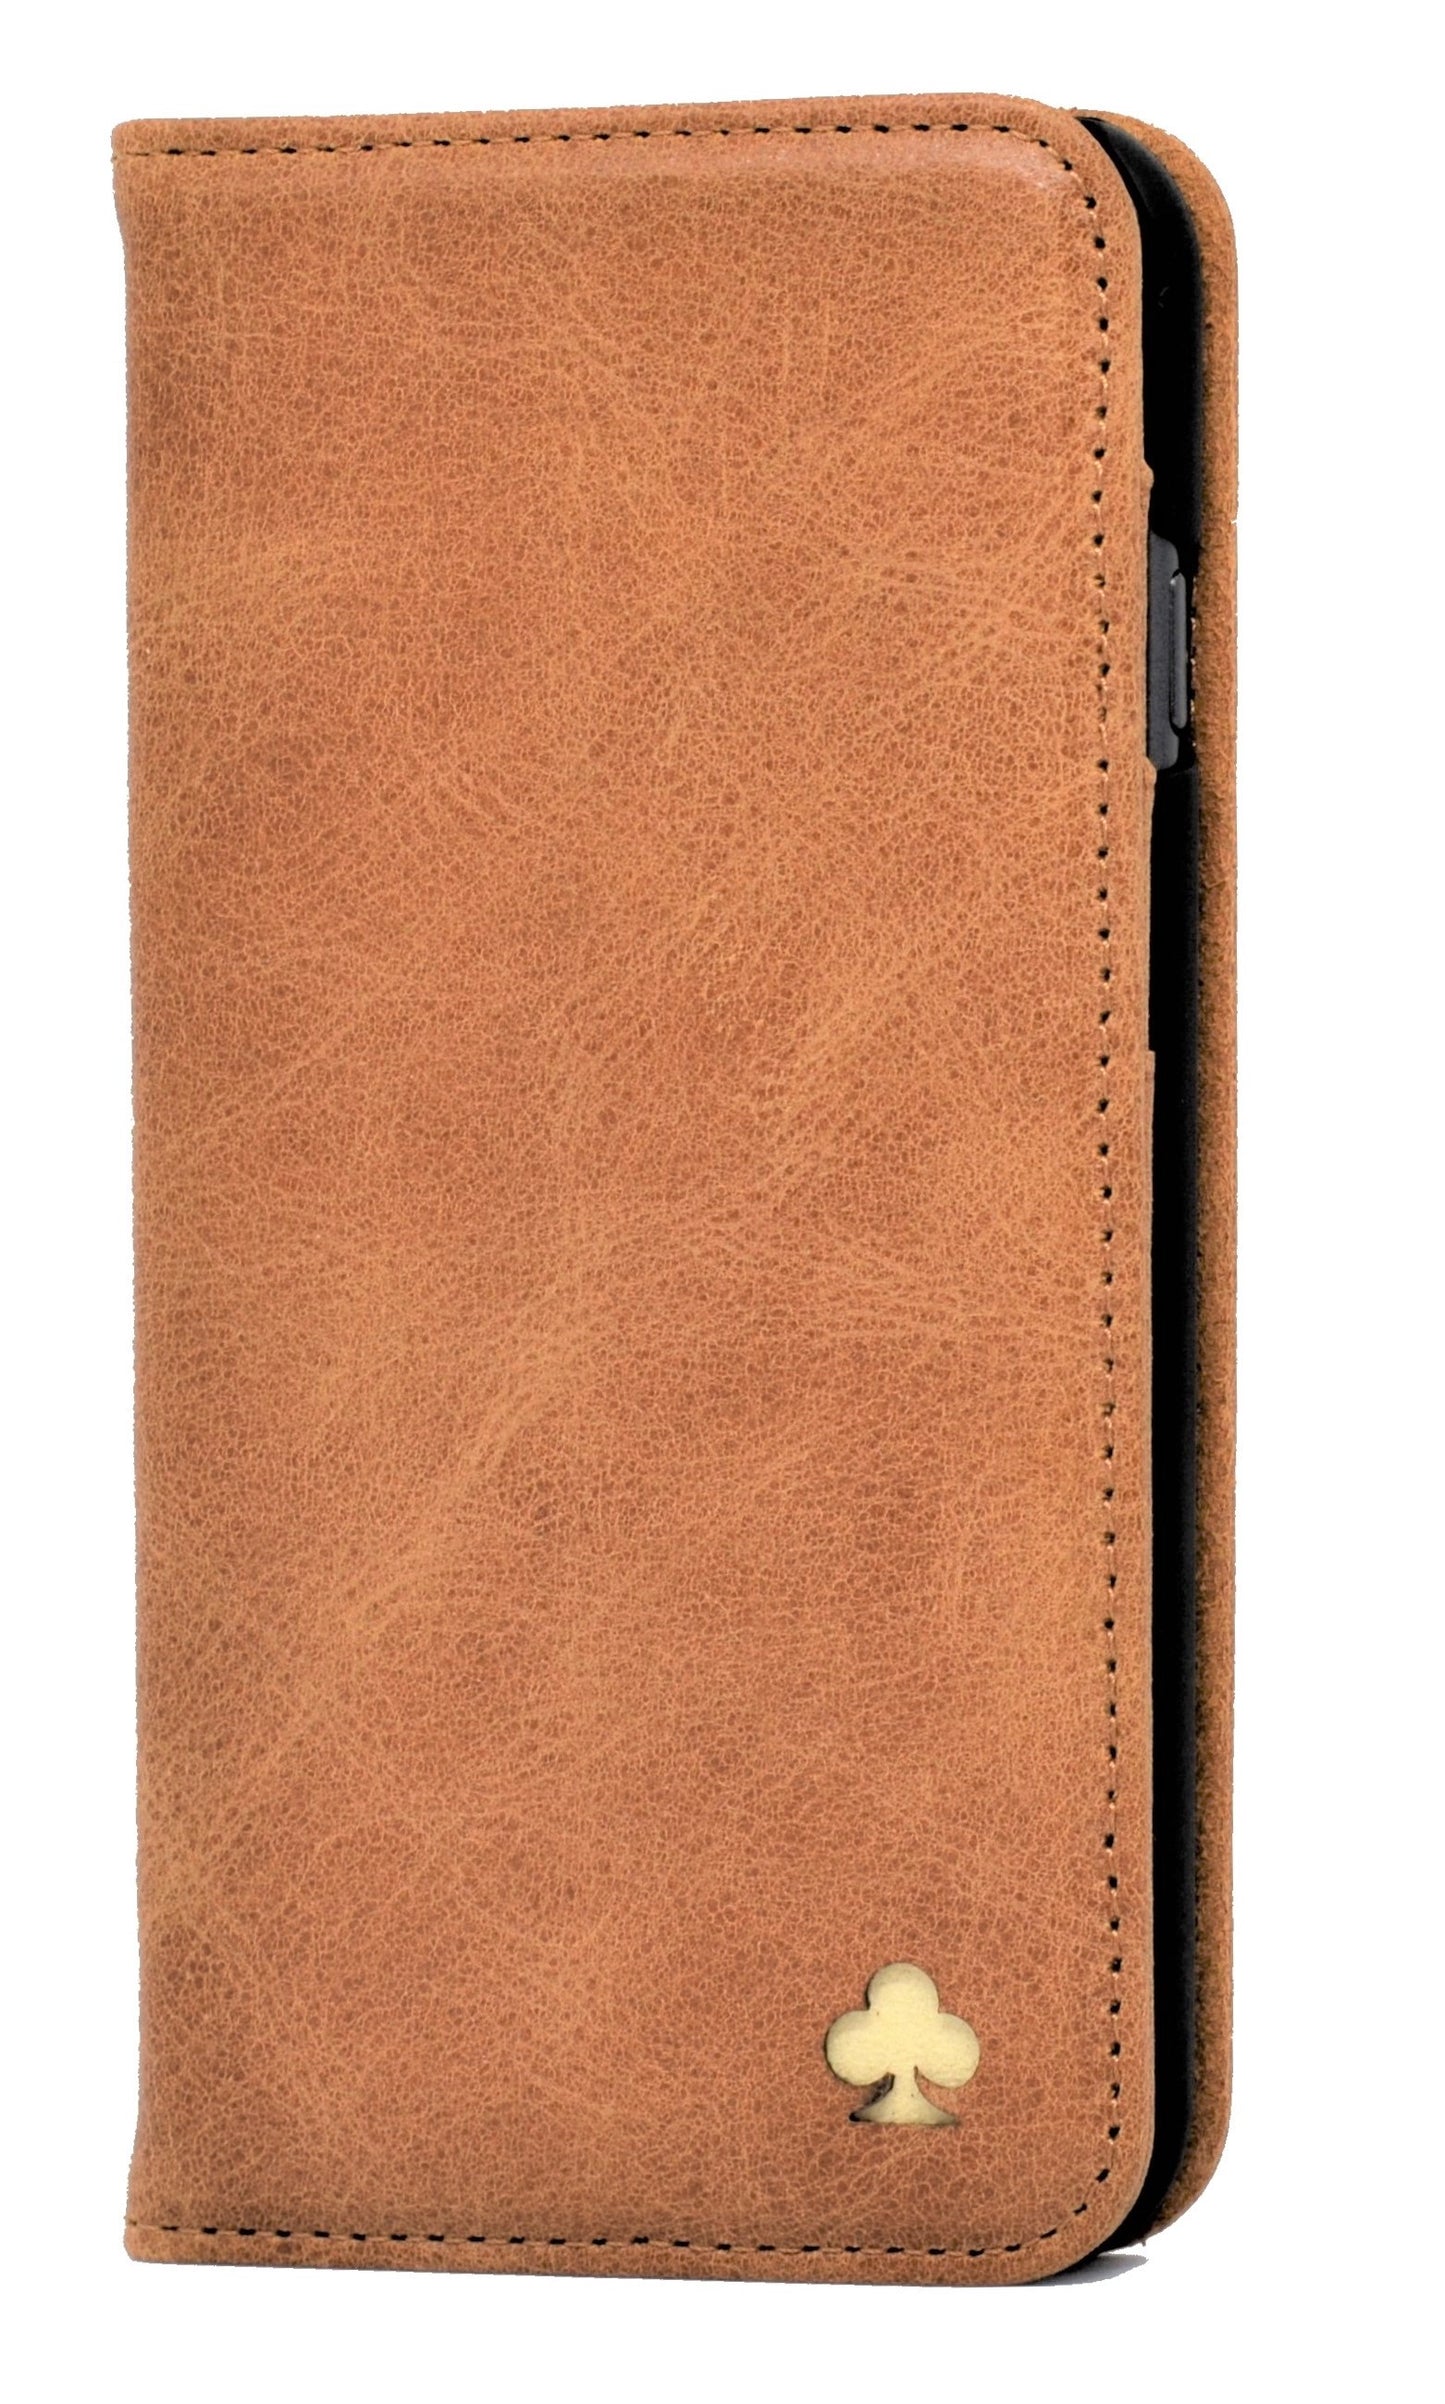 iPhone 12 Leather Case. Premium Slim Genuine Leather Stand Case/Cover/Wallet (Tan)